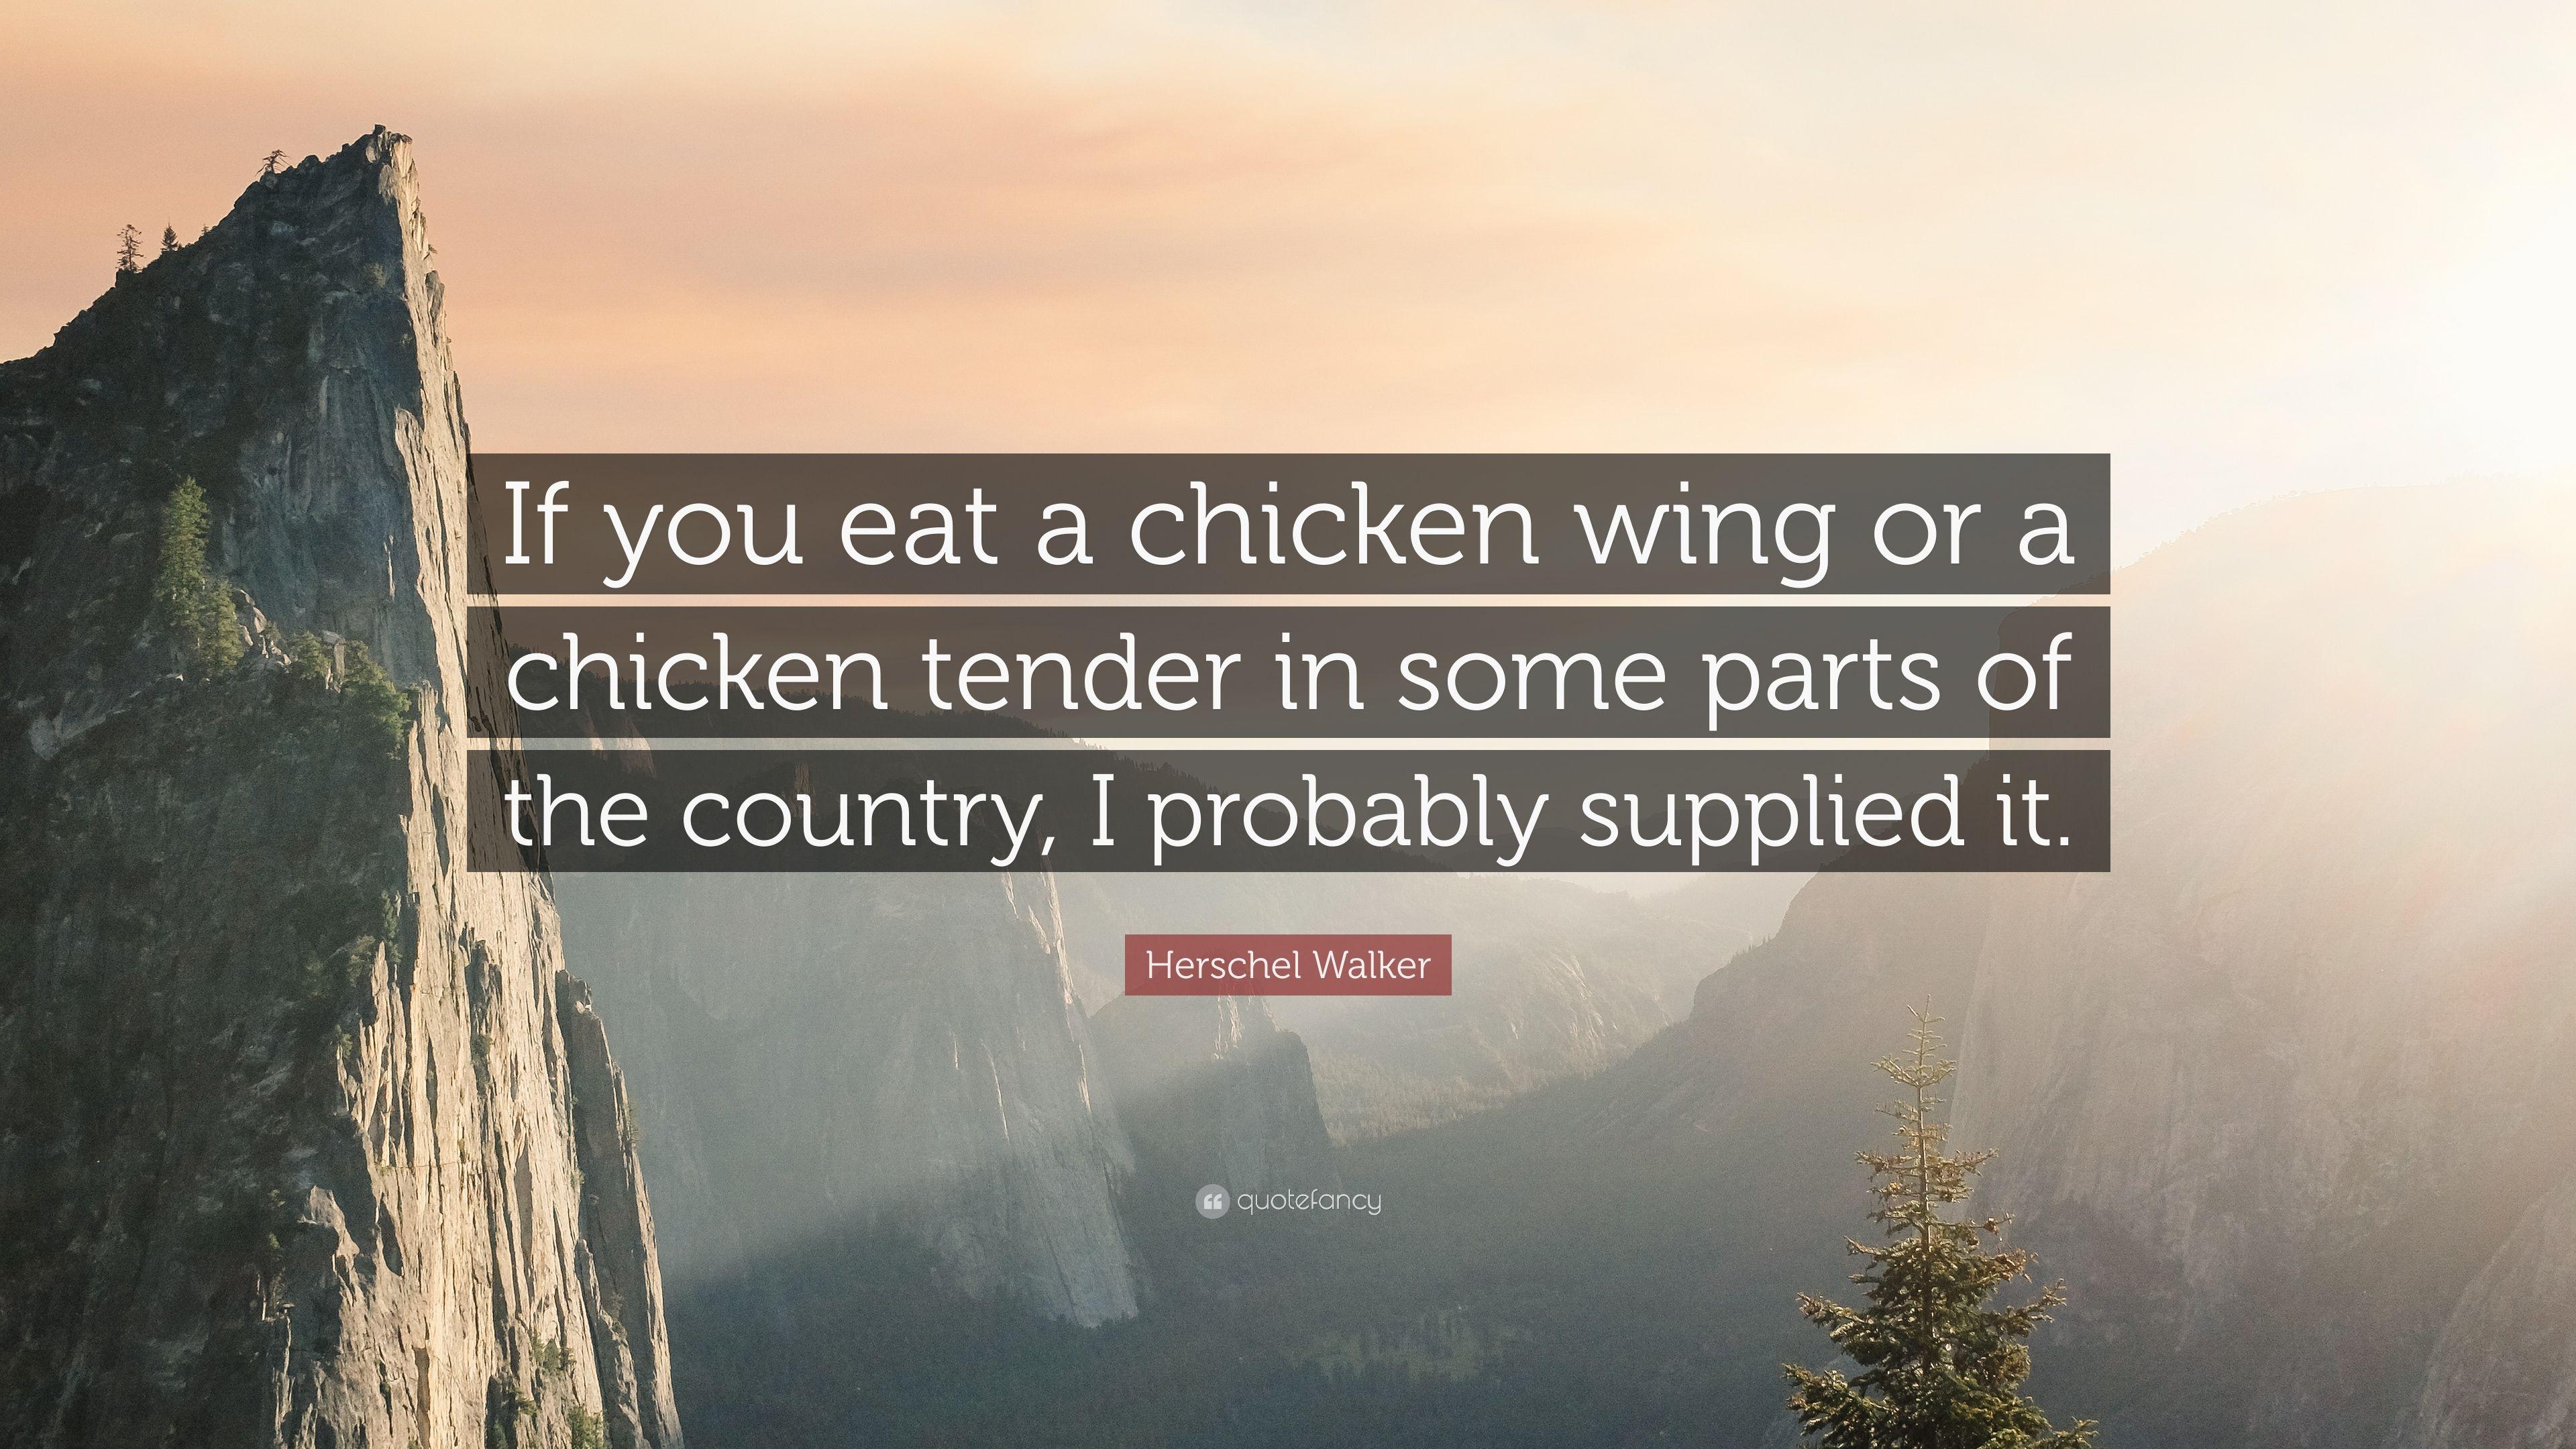 Herschel Walker Quote: “If you eat a chicken wing or a chicken